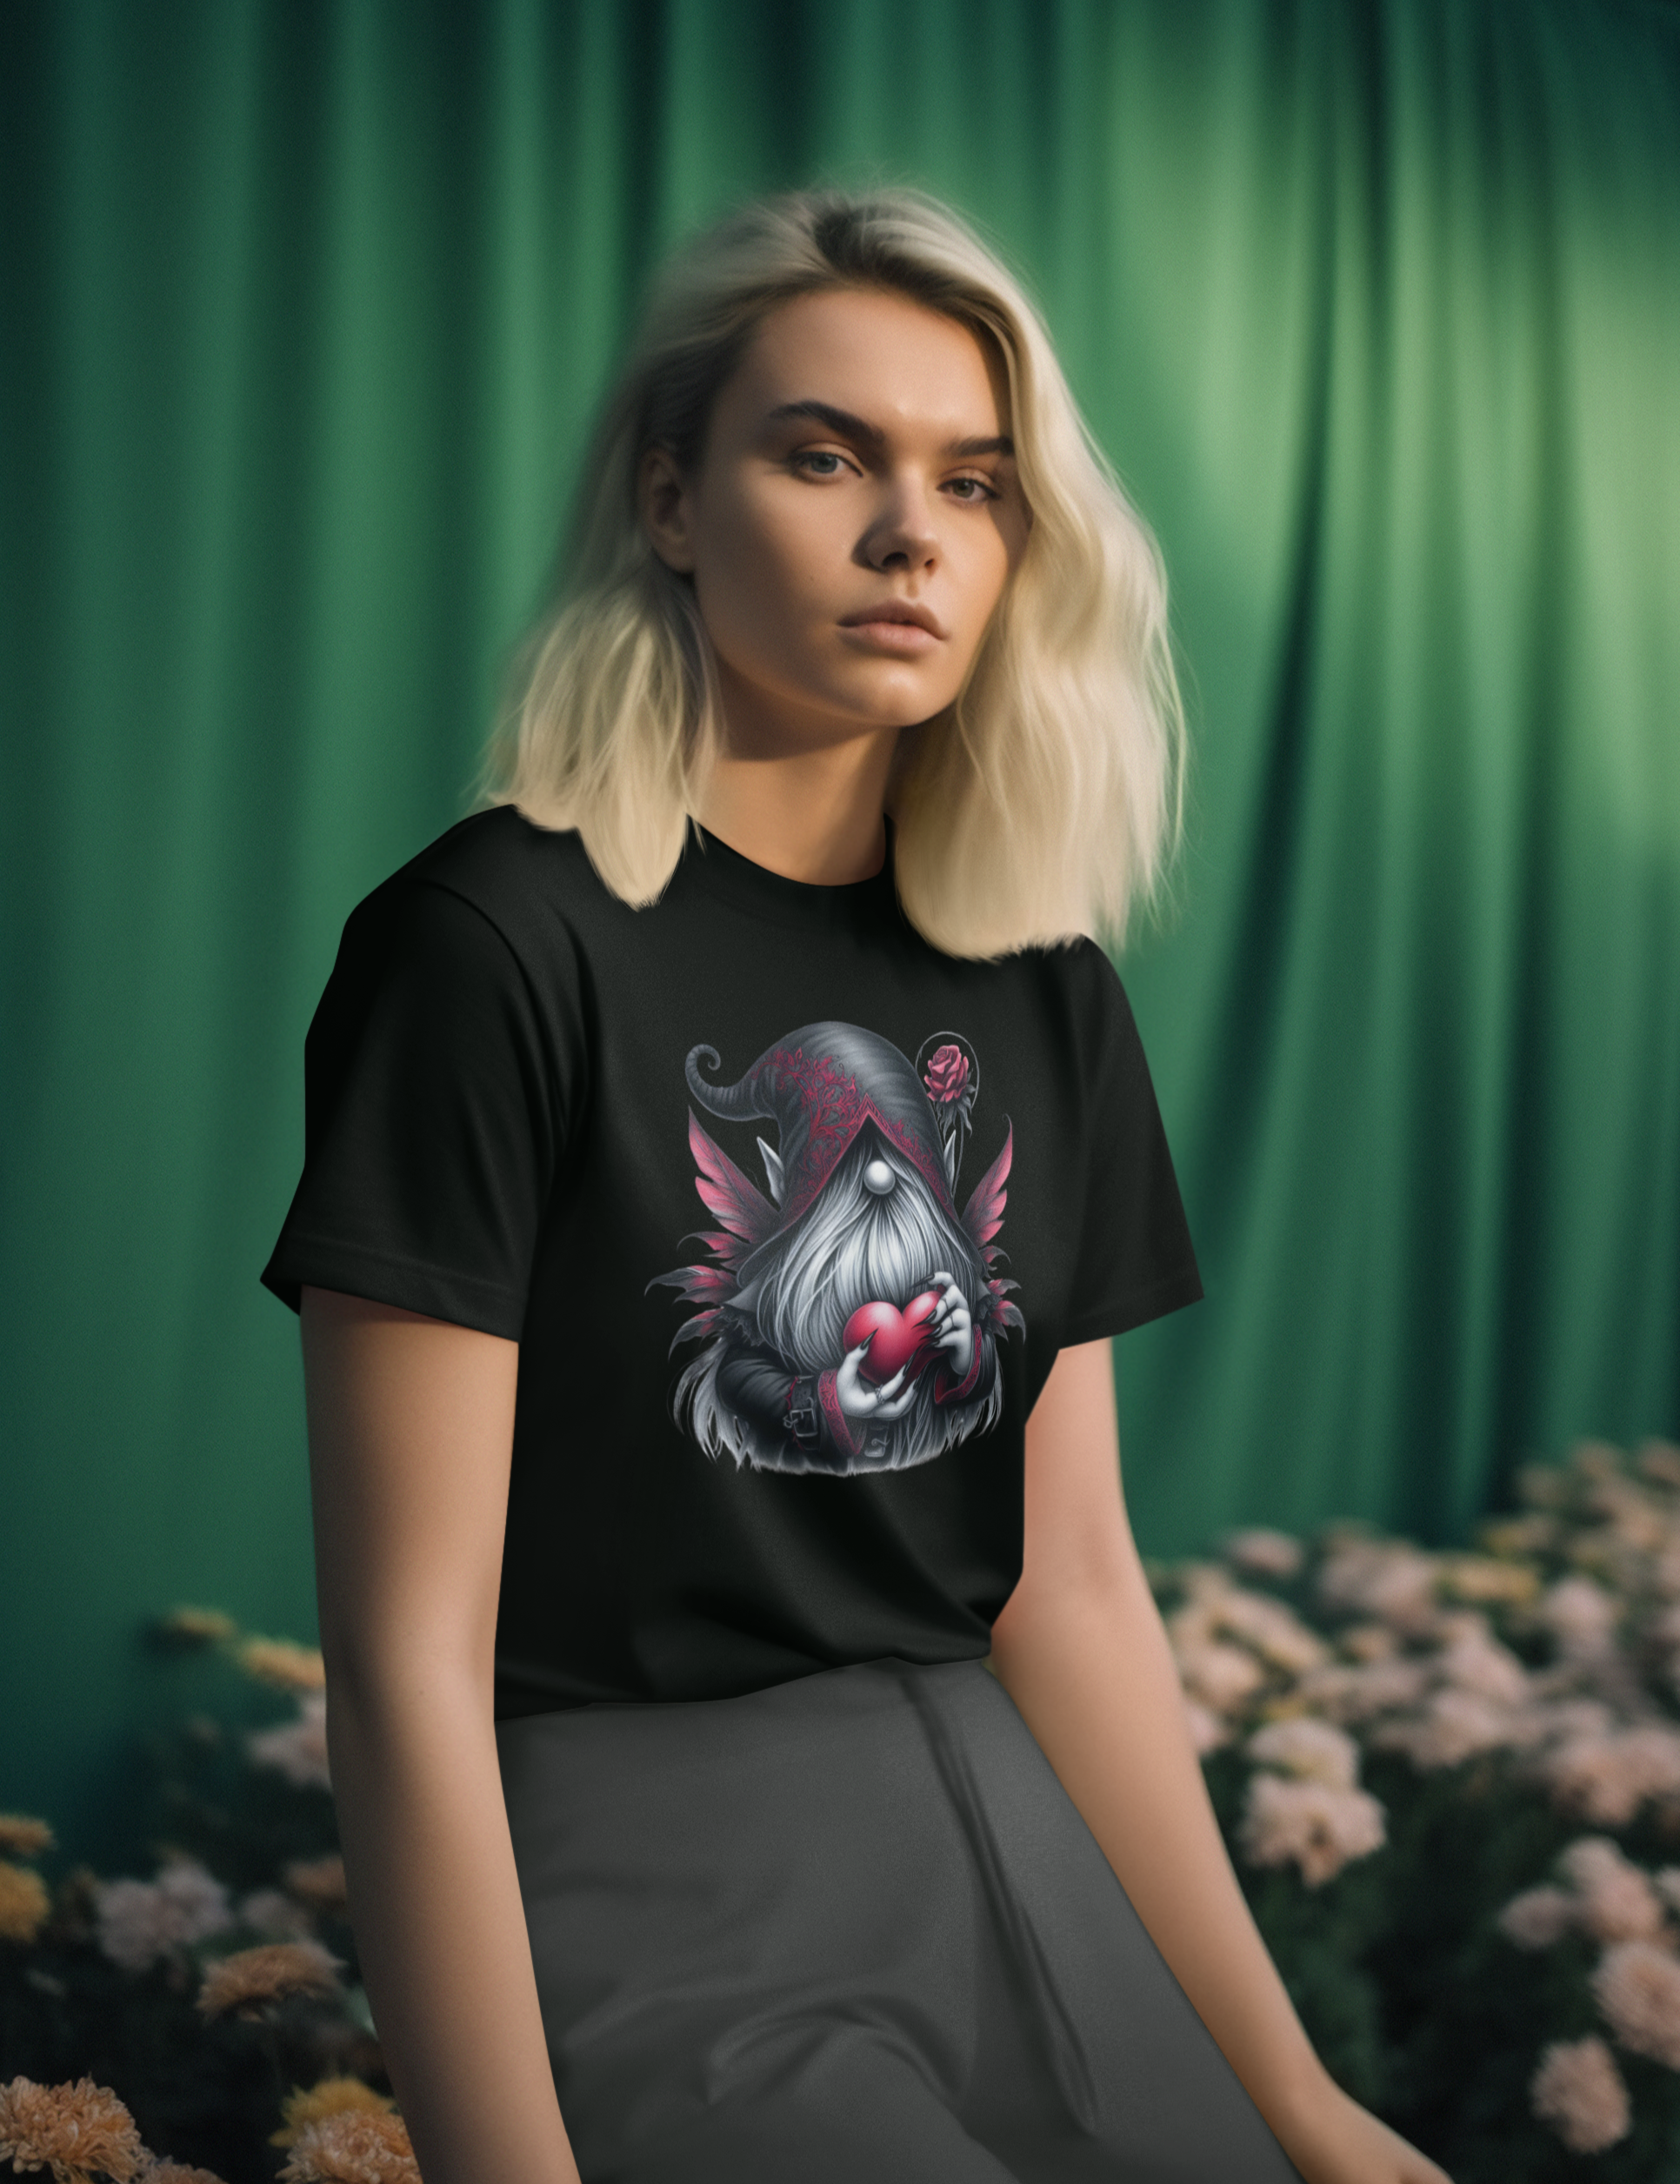 round-neck-t-shirt-mockup-of-an-ai-created-woman-surrounded-by-flowers-m33479_c3023c2a-f46c-429b-9480-36c37452d761.png